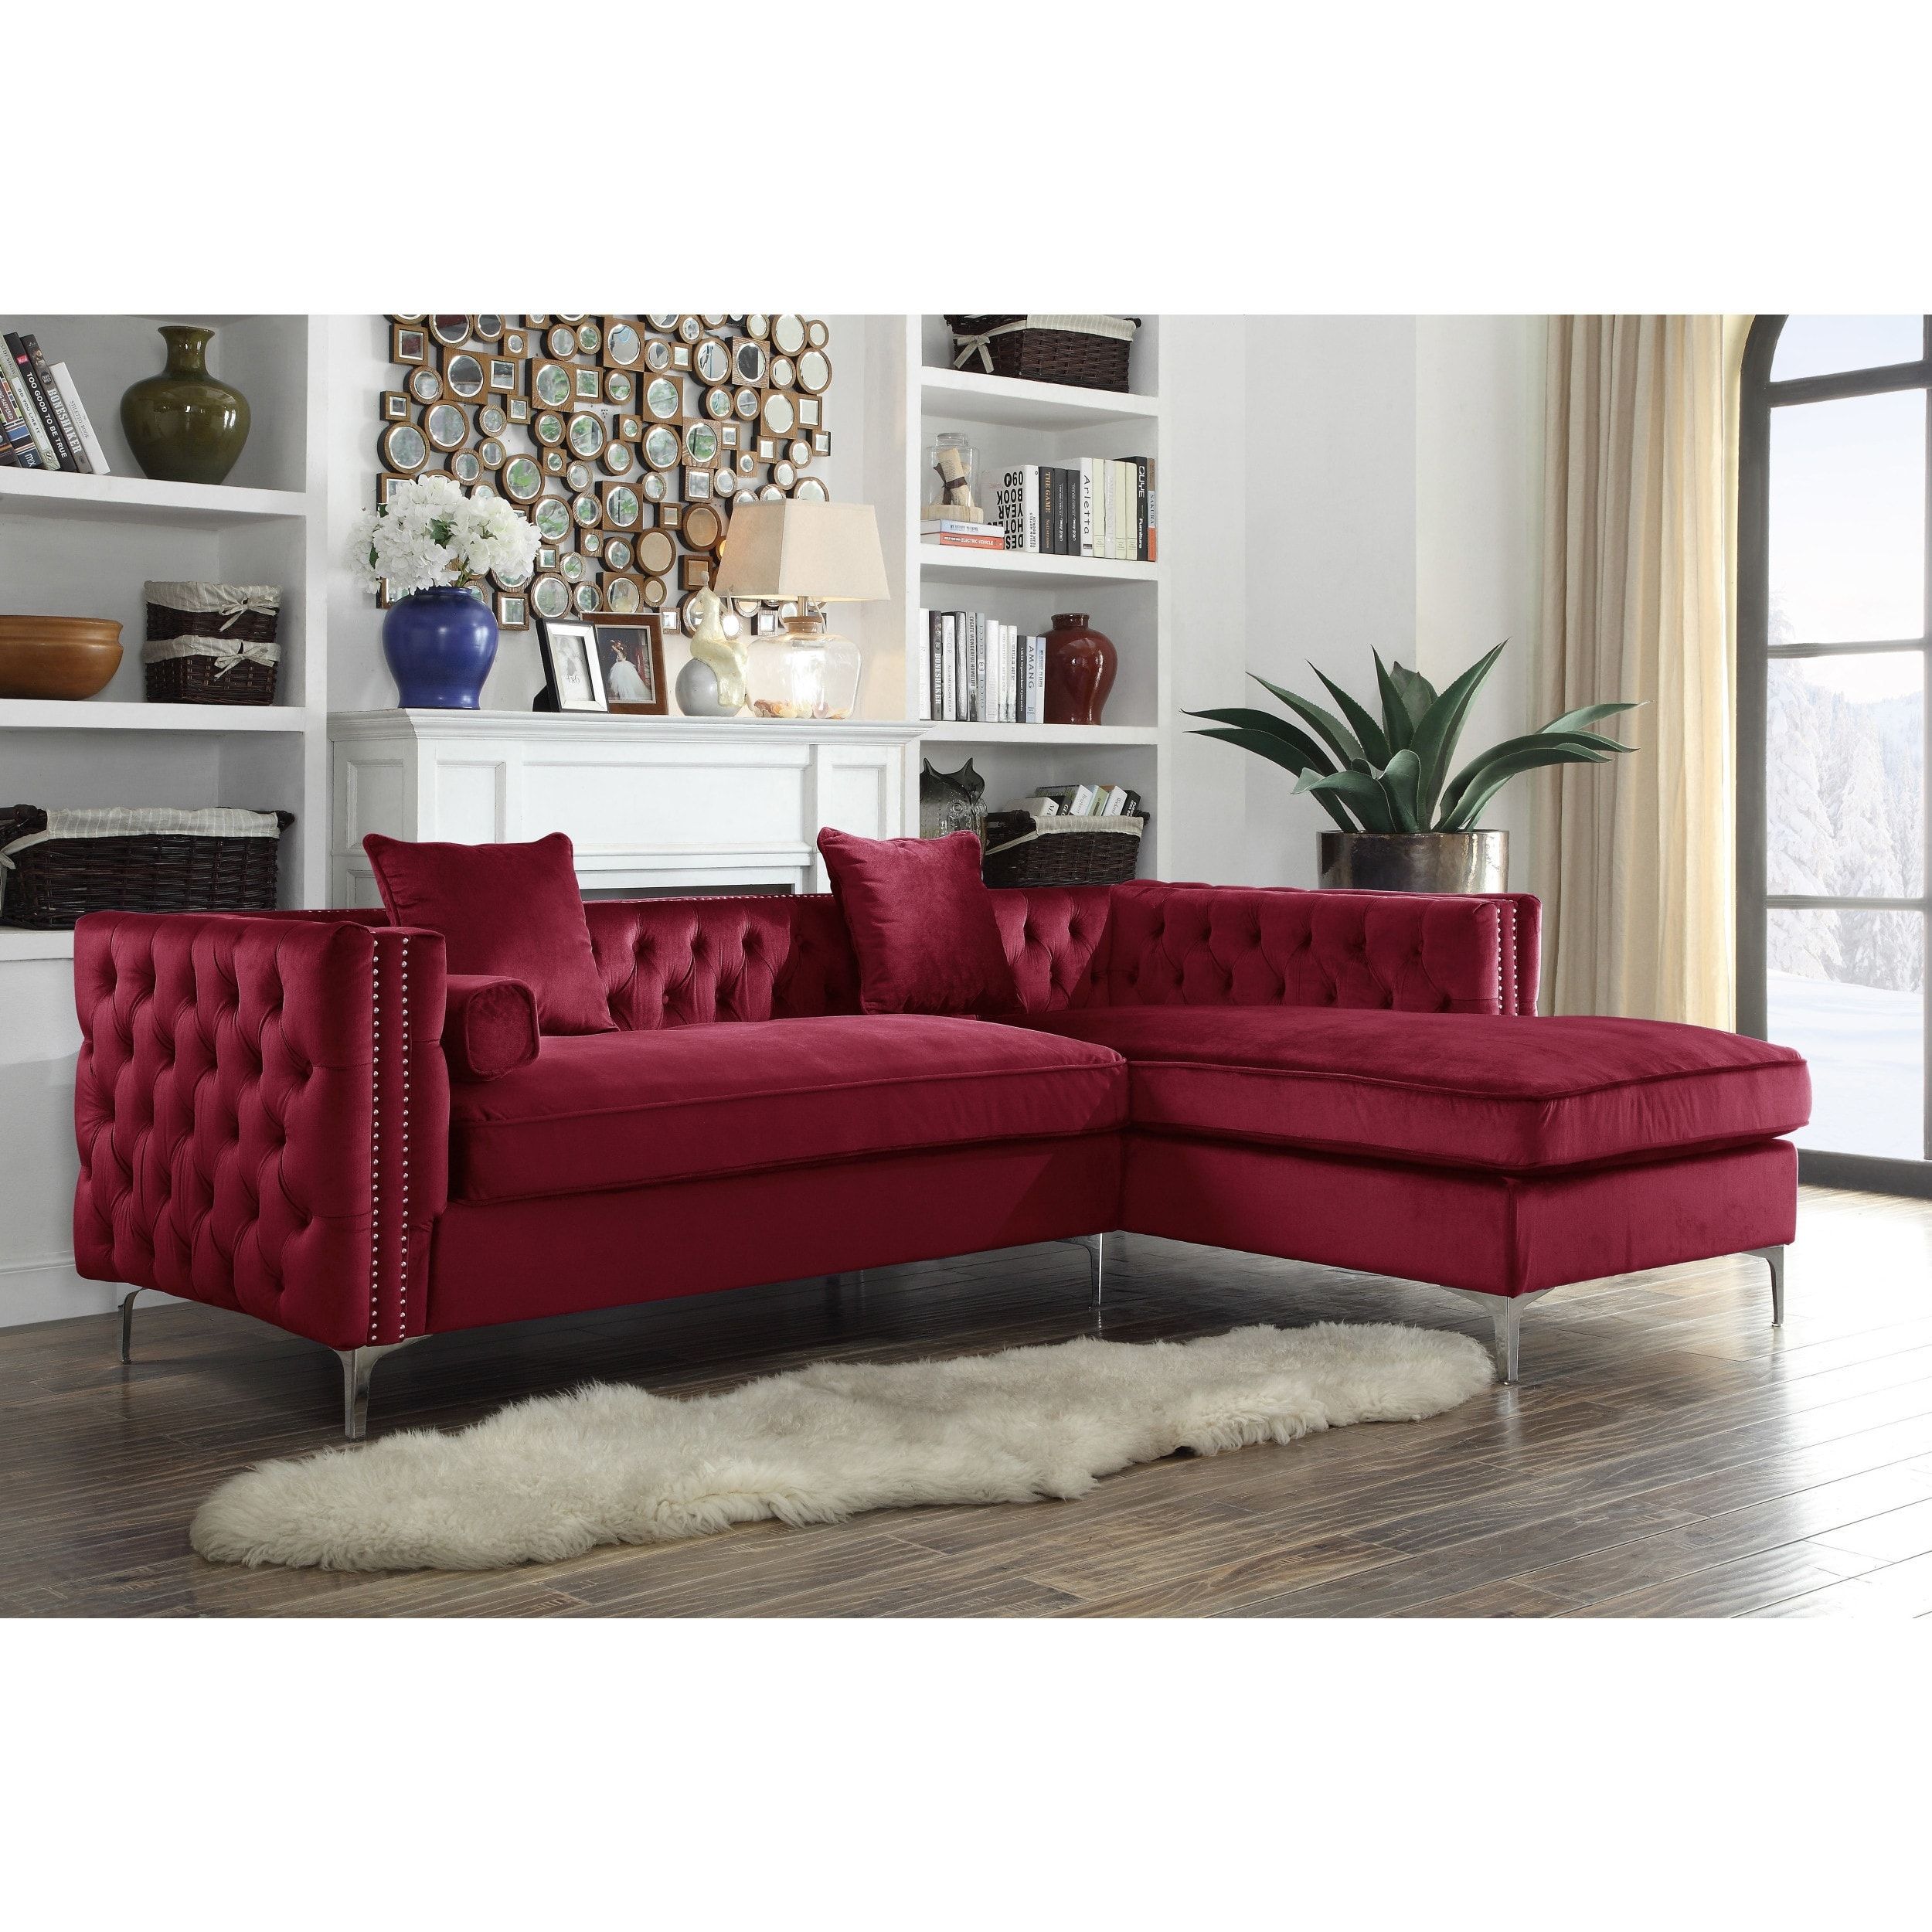 Chic Home Monet Velvet Button Tufted Silver Nailhead Trim Right Pertaining To Sectional Sofas With Nailhead Trim (View 7 of 10)